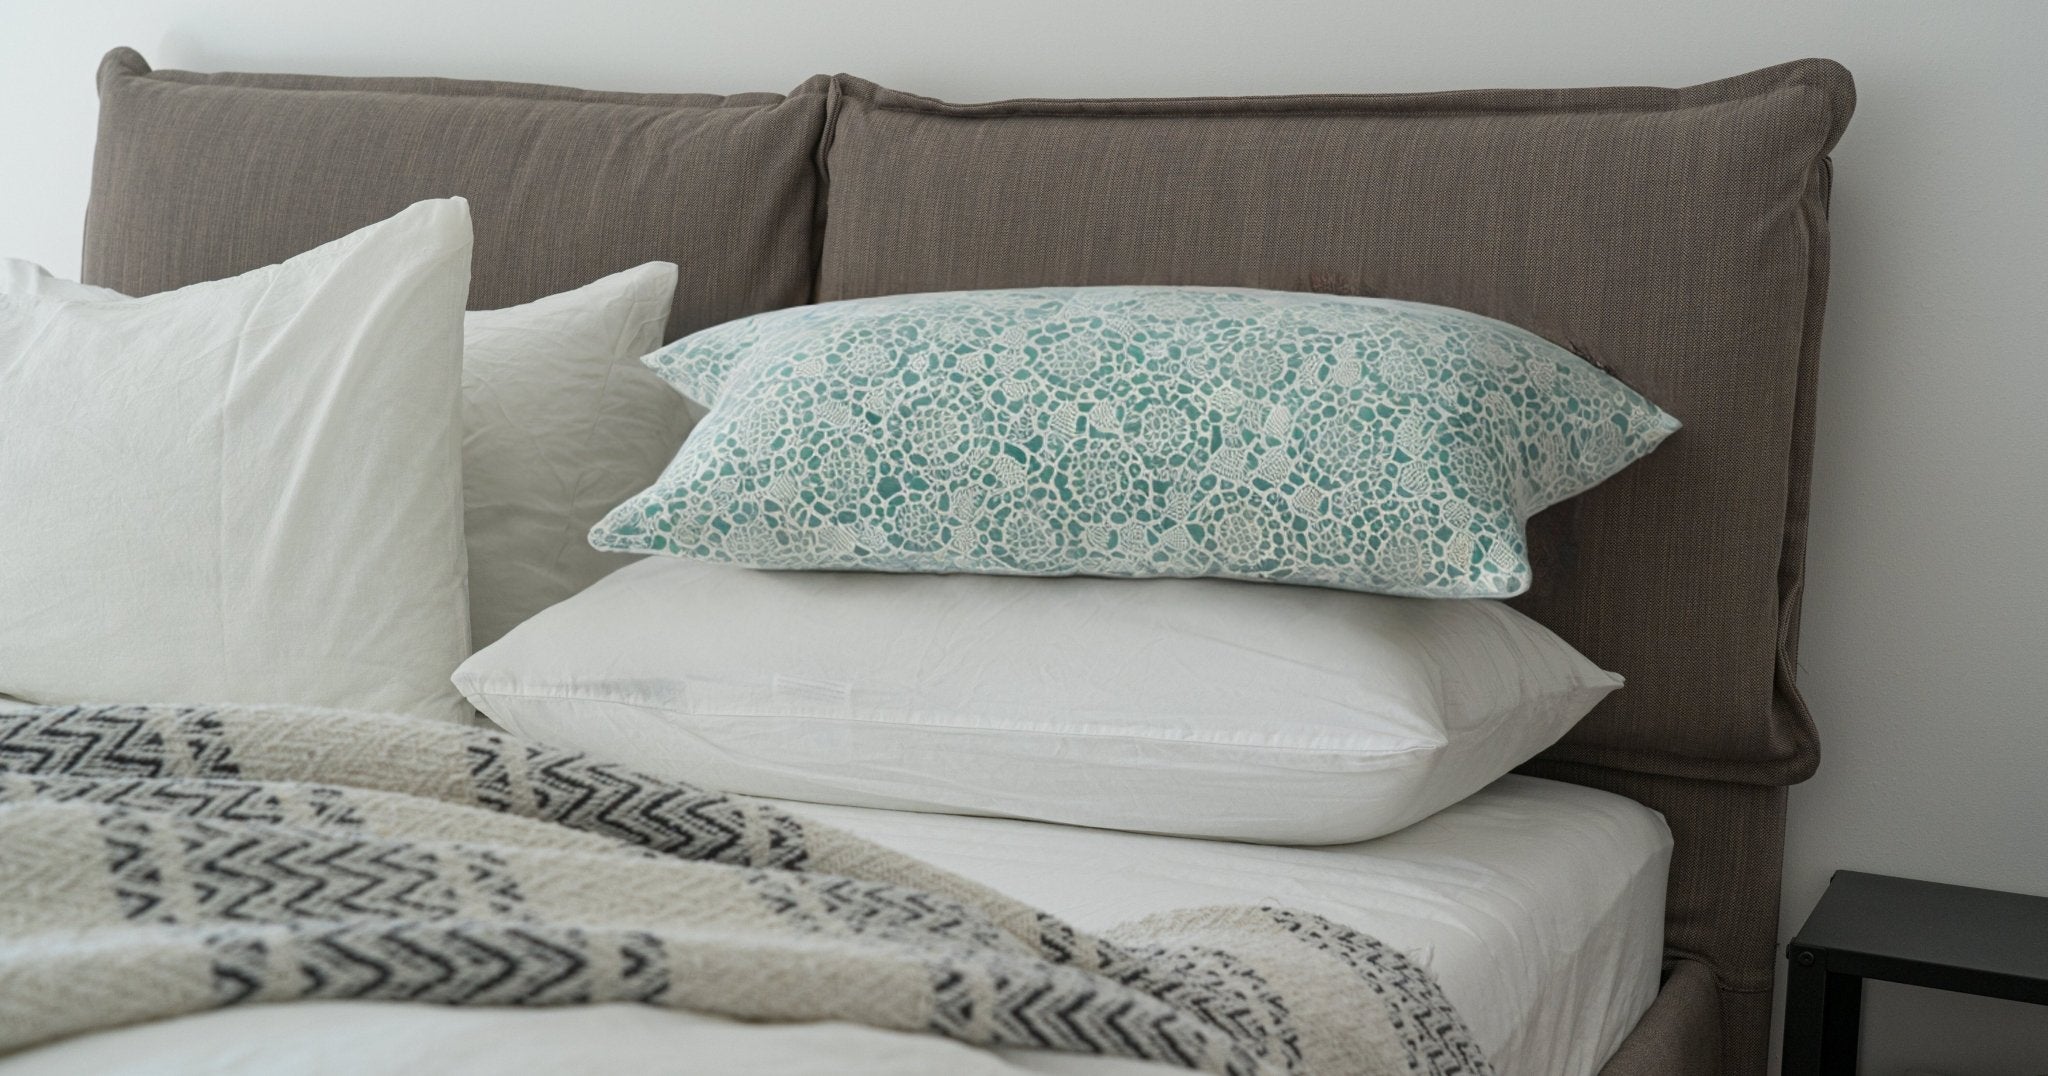 10 Gorgeous Block Print Pillow Cover Designs to Transform Your Home - FABDIVINE LLC